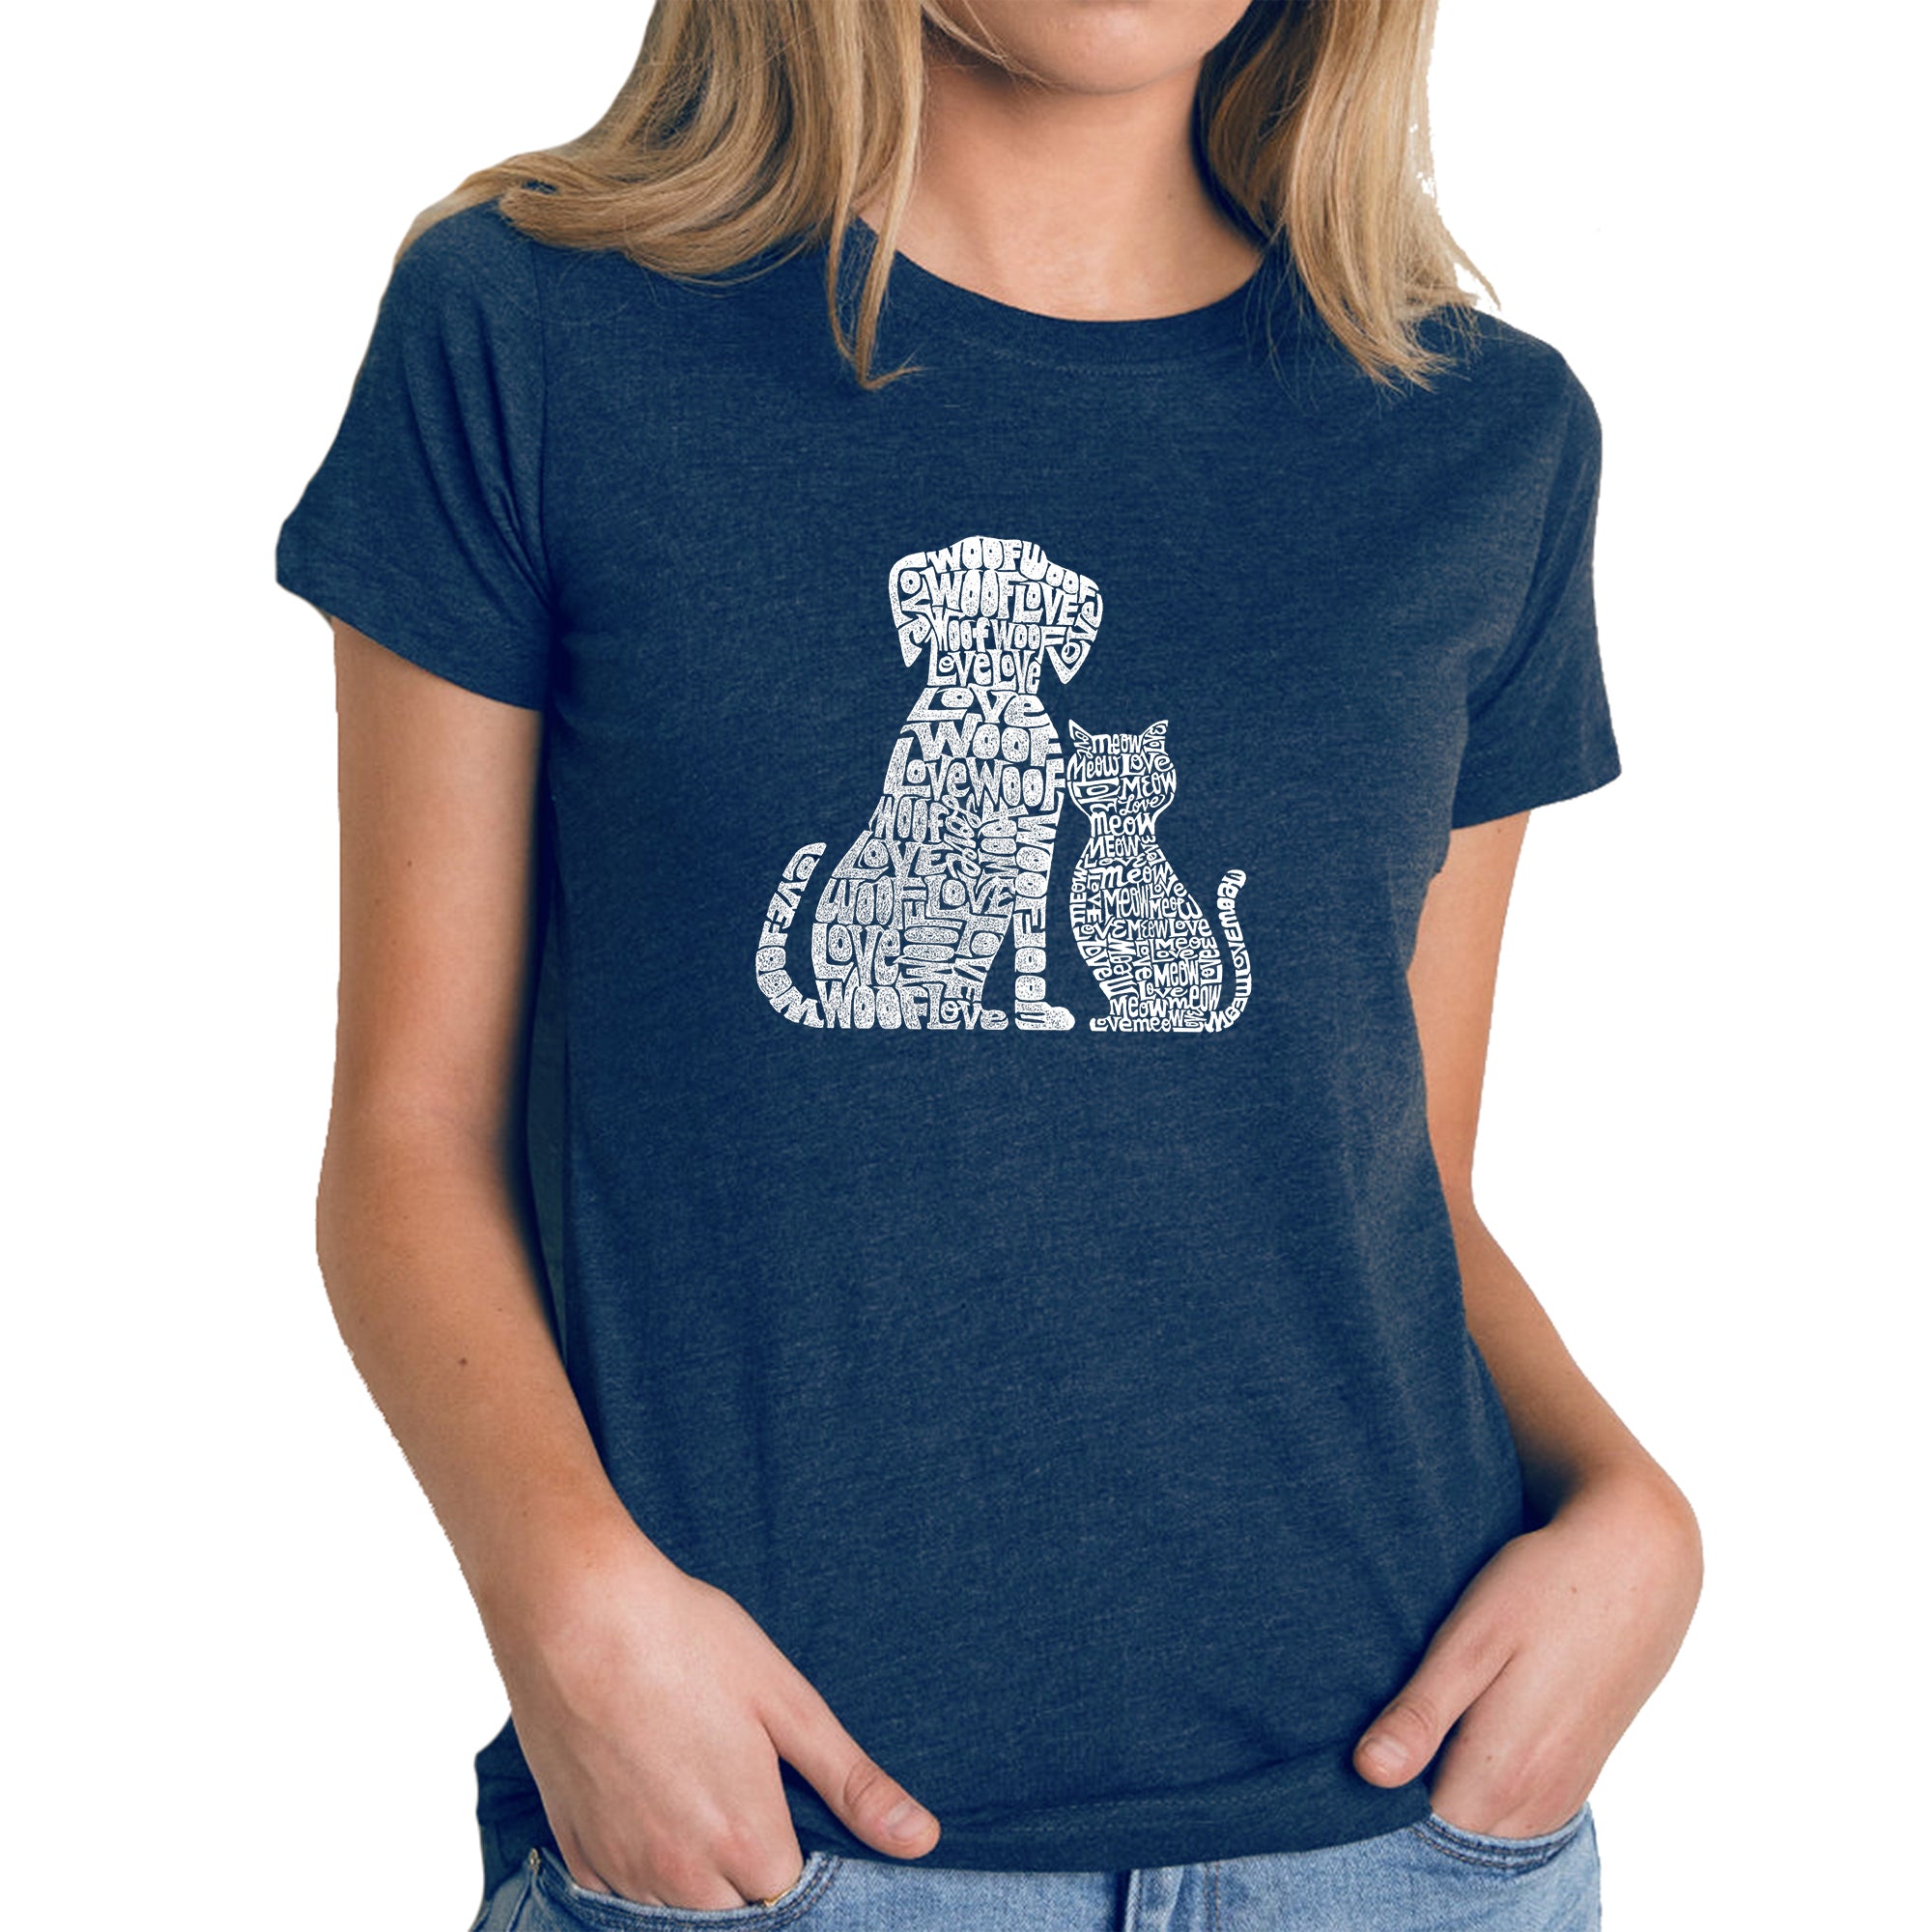 Dogs And Cats - Women's Premium Blend Word Art T-Shirt - Turquoise - XX-Large